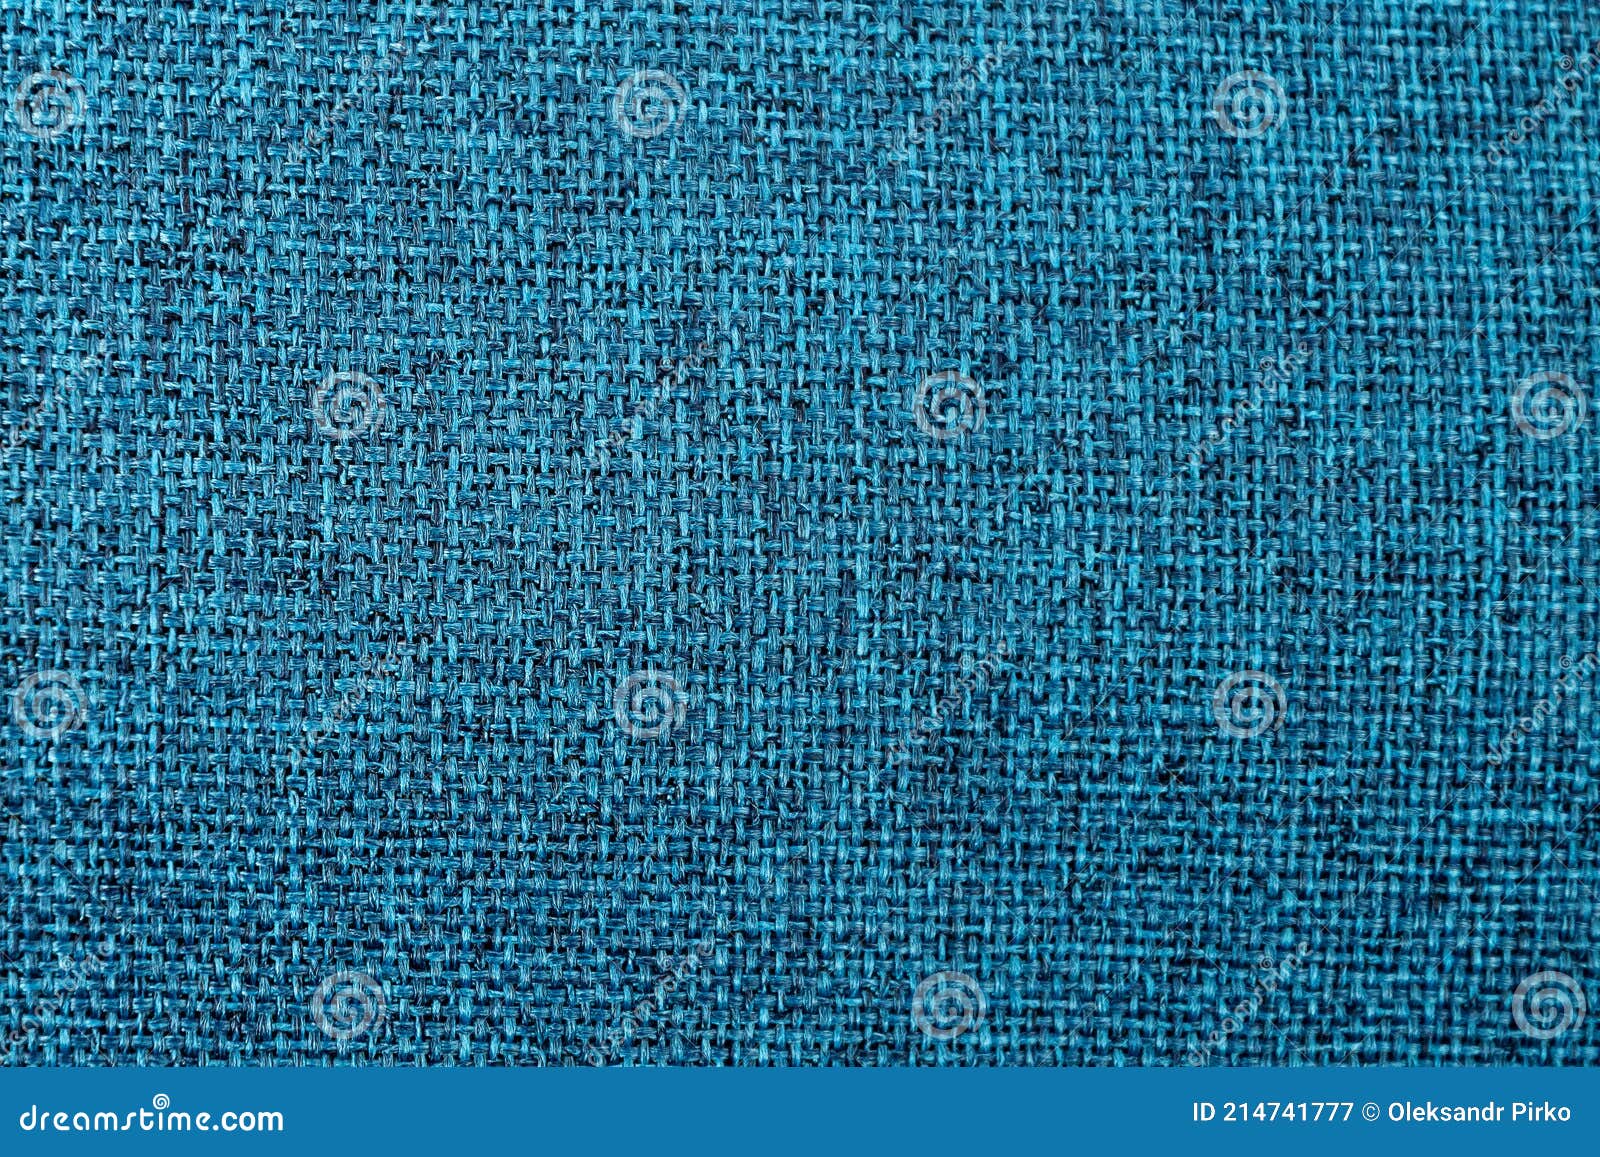 Big Blue linen seamless texture in close-up (texture pattern for